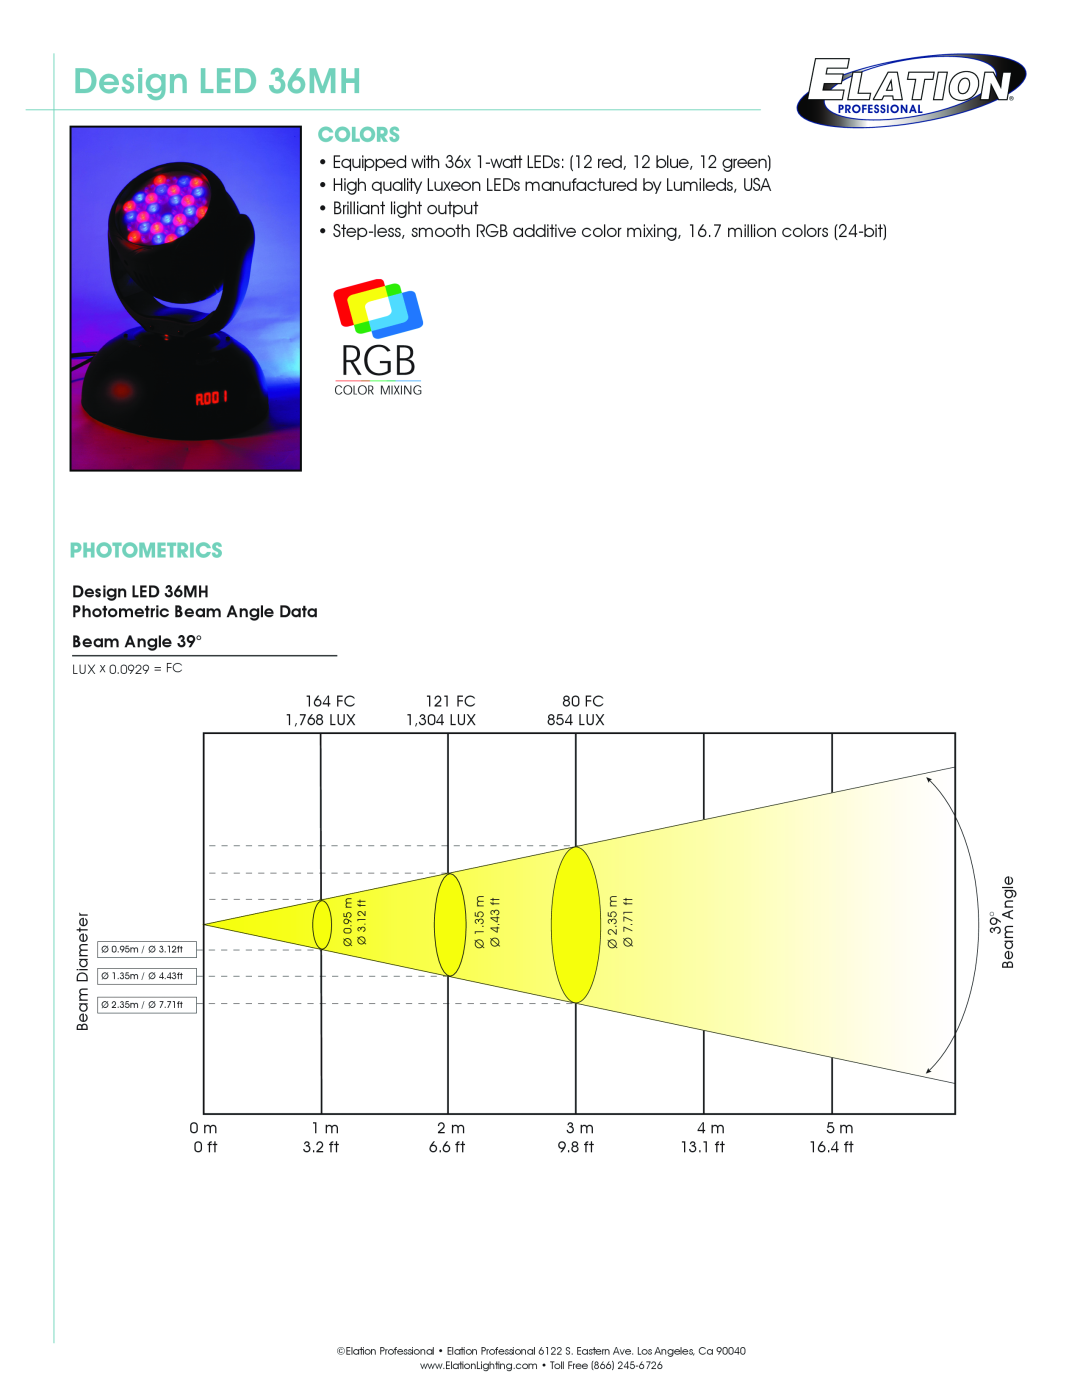 Elation Professional technical specifications Colors, Photometrics, Design LED 36MH, 1,768 LUX, 1,304 LUX, 854 LUX 